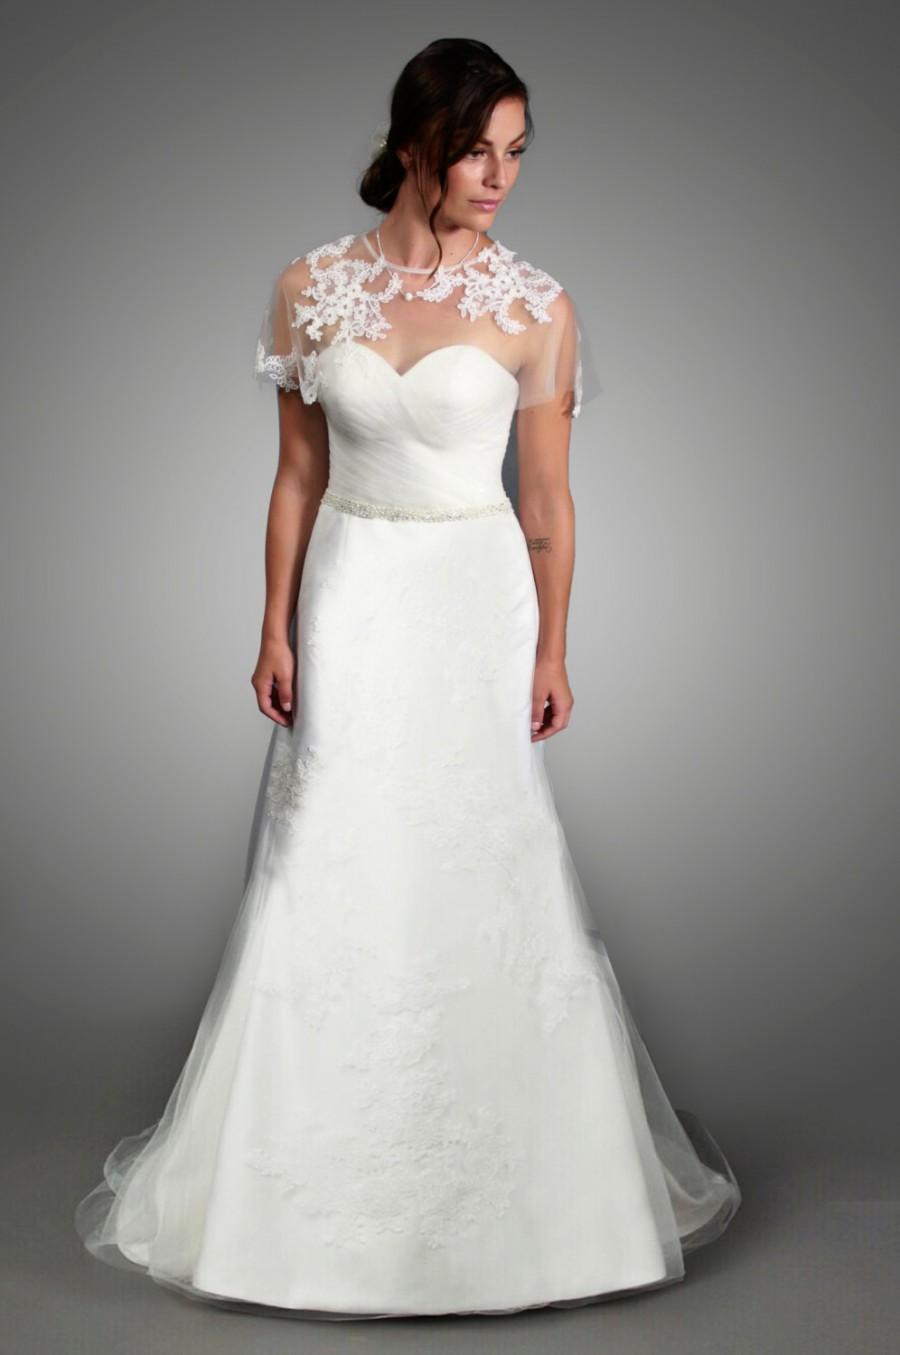 Mariage - Elegant White A Line Sweetheart Lace Applique featured with crystal belt and detachable lace bolero